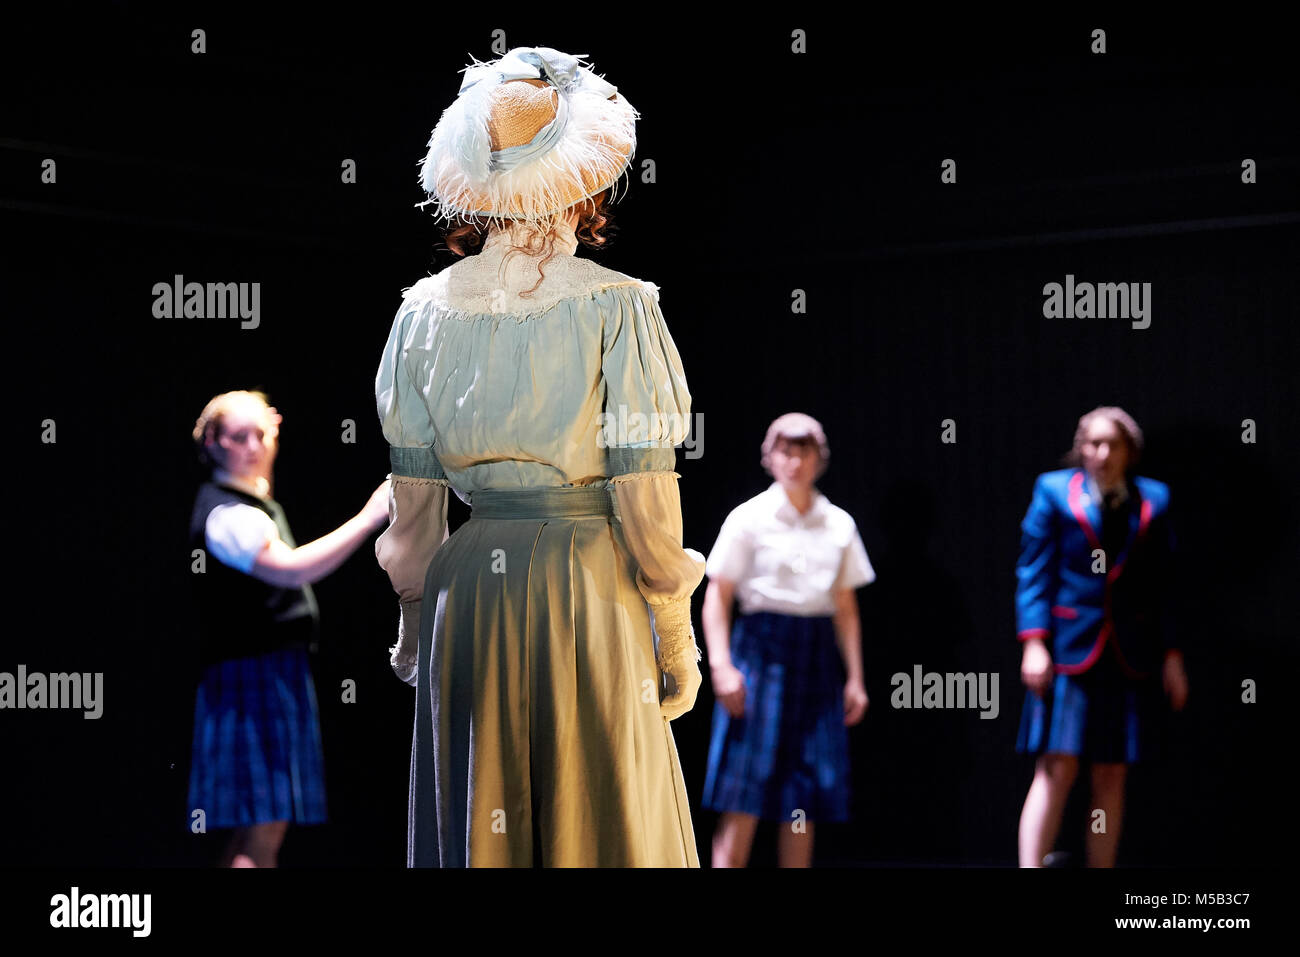 London, UK. 21st February, 2018.  Malthouse Theatre/Black Swan State Theatre present Picnic at Hanging Rock at the Barbican Theatre, London. 21st February 2018.  Cast  Harriet Gordon-Anderson Arielle Gray Amber McMahon Elizabeth Nabben Nikki Shiels  Directed by Matthew Lutton Credit: Thomas Bowles/Alamy Live News Stock Photo